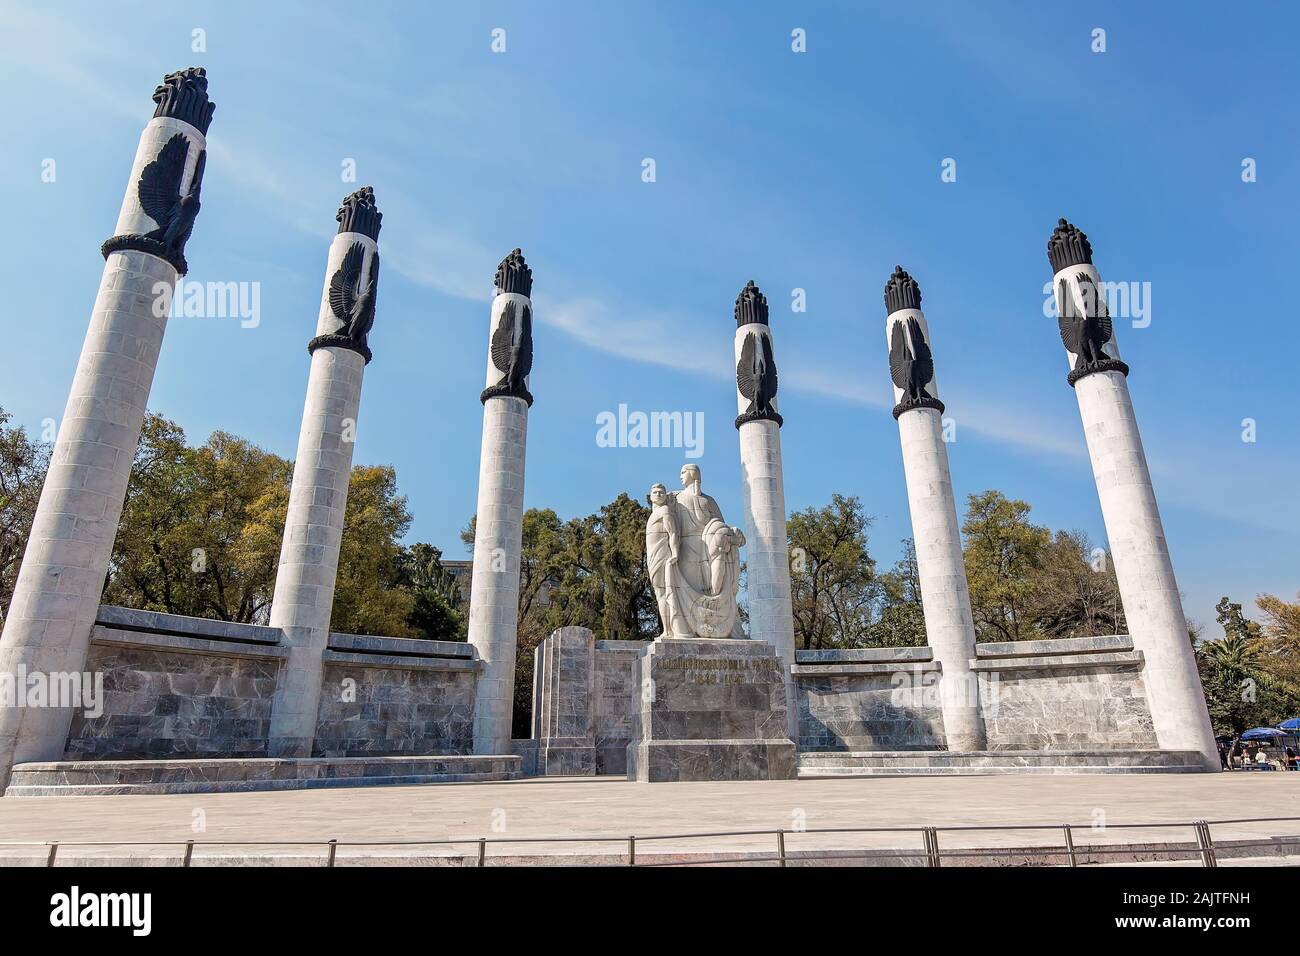 Mexico City, Mexico-25 December, 2019: Boy Soldiers monument (also known as the Heroes Children Monument) in Chapultepec park (Bosque de Chapultepec) Stock Photo